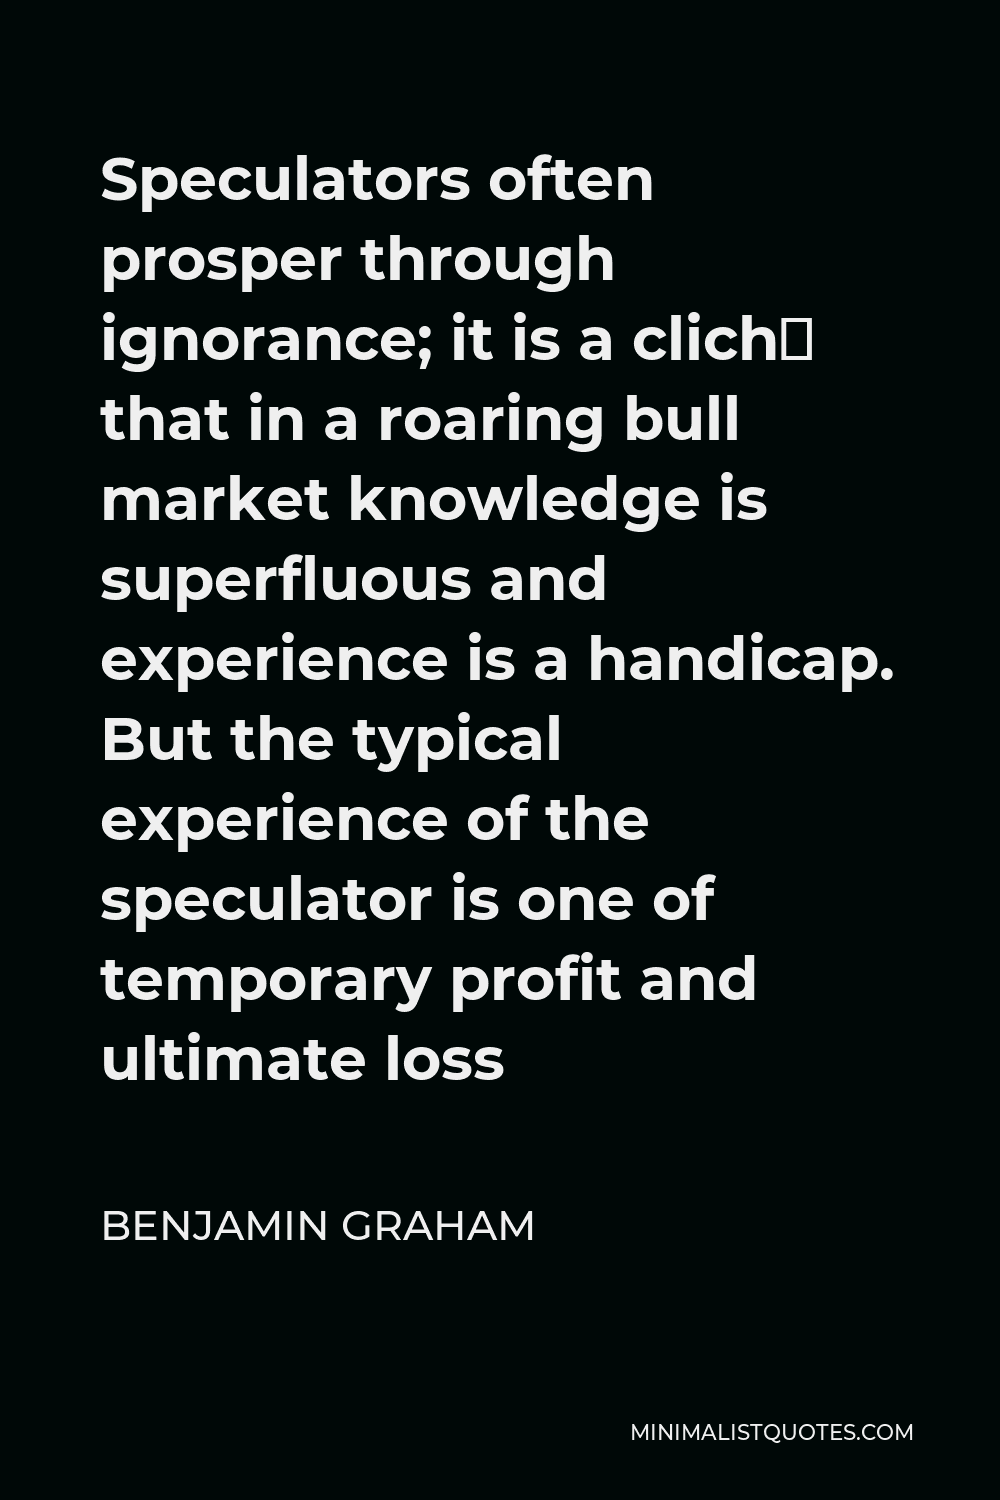 Benjamin Graham Quote - Speculators often prosper through ignorance; it is a cliché that in a roaring bull market knowledge is superfluous and experience is a handicap. But the typical experience of the speculator is one of temporary profit and ultimate loss